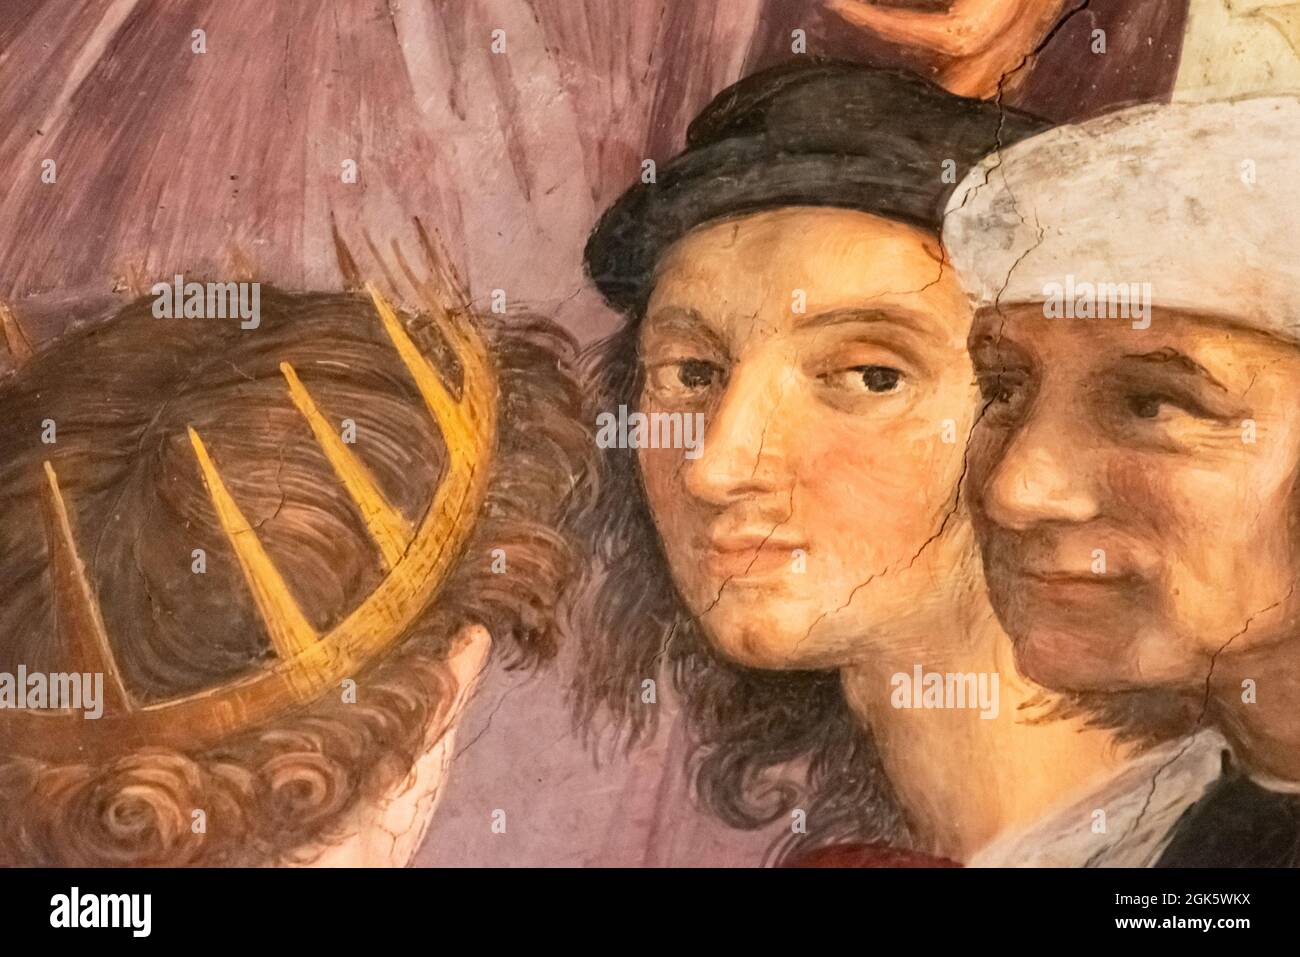 Detail of medieval painting showing in close-up the faces of two men talking to a third one wearing a golden crown Stock Photo